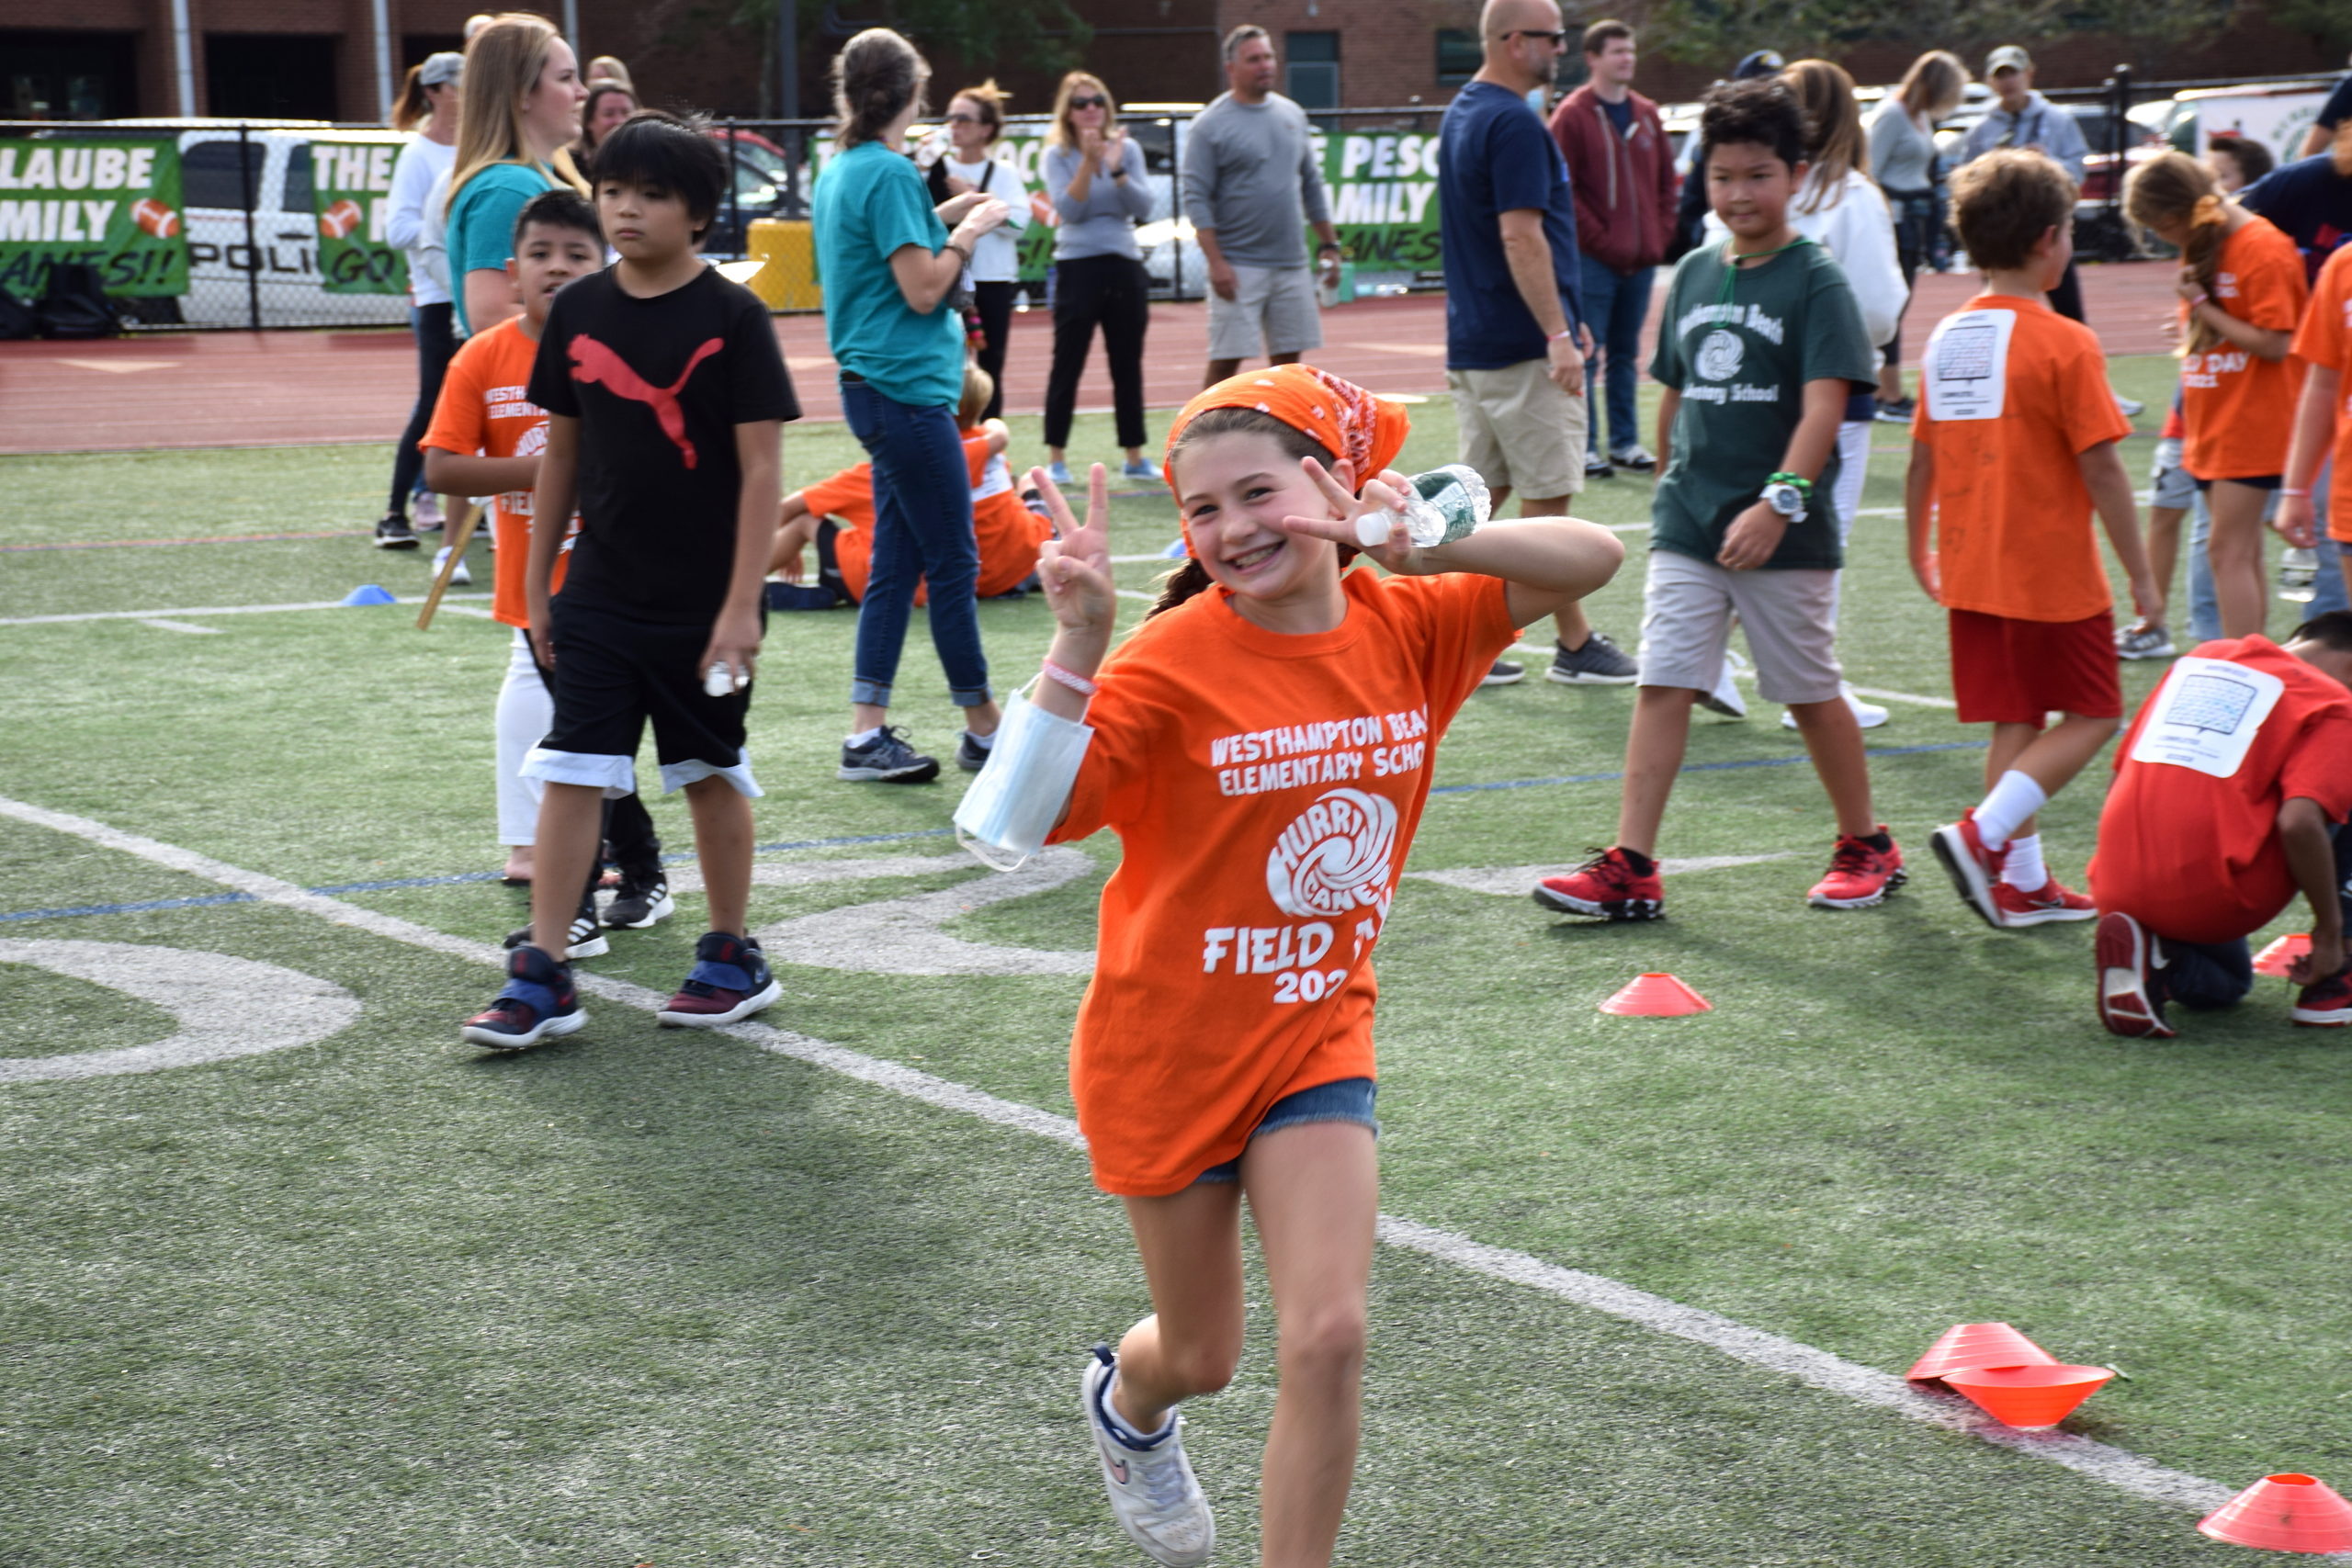 Westhampton Beach Elementary School students raised funds for school programs by participating in the annual Hurricane Fun Run Monday, September 27. WESTHAMPTON BEACH SCHOOL DISTRICT